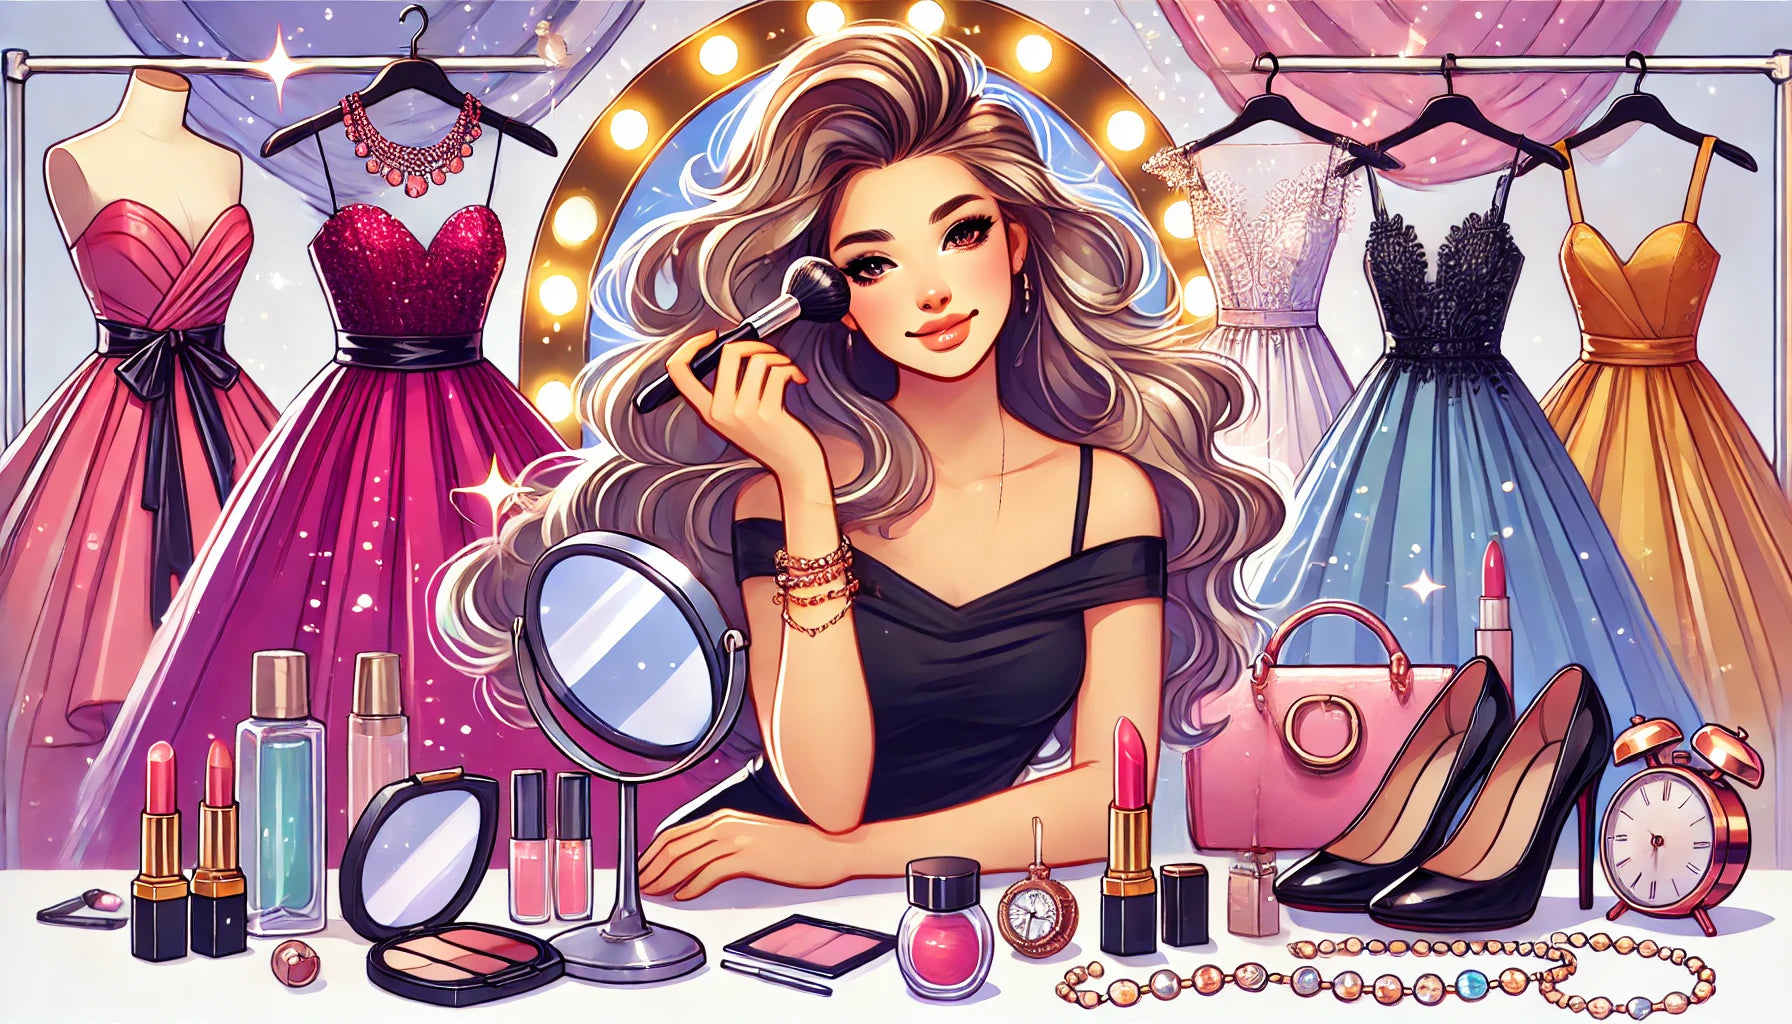 The most-awaited event is around the corner? Follow these 6 tips to get a flawless look